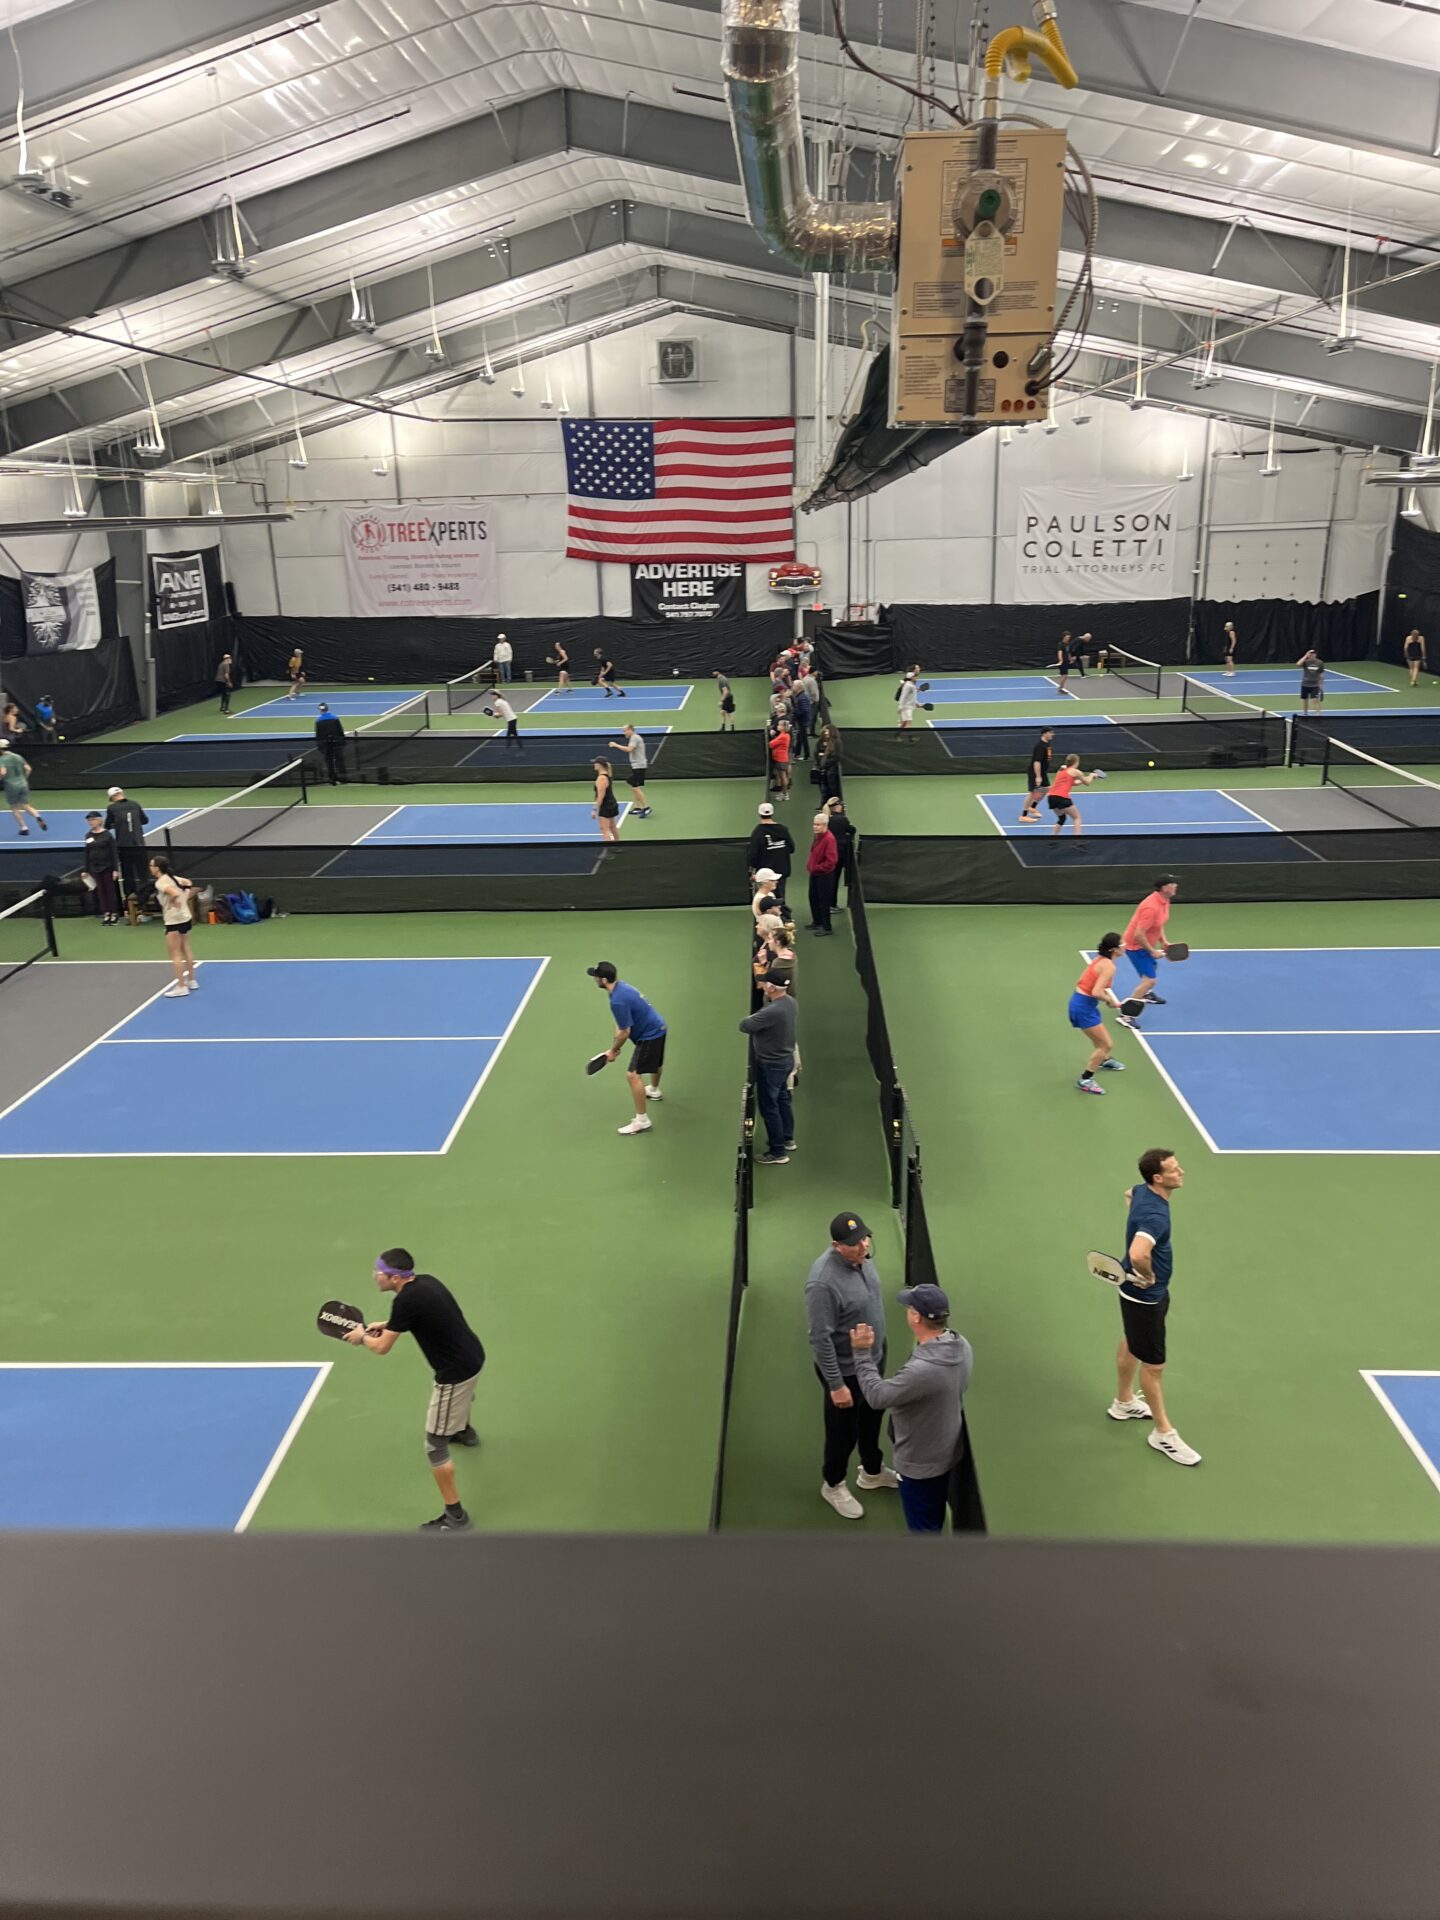 A group of people playing tennis in an indoor court.